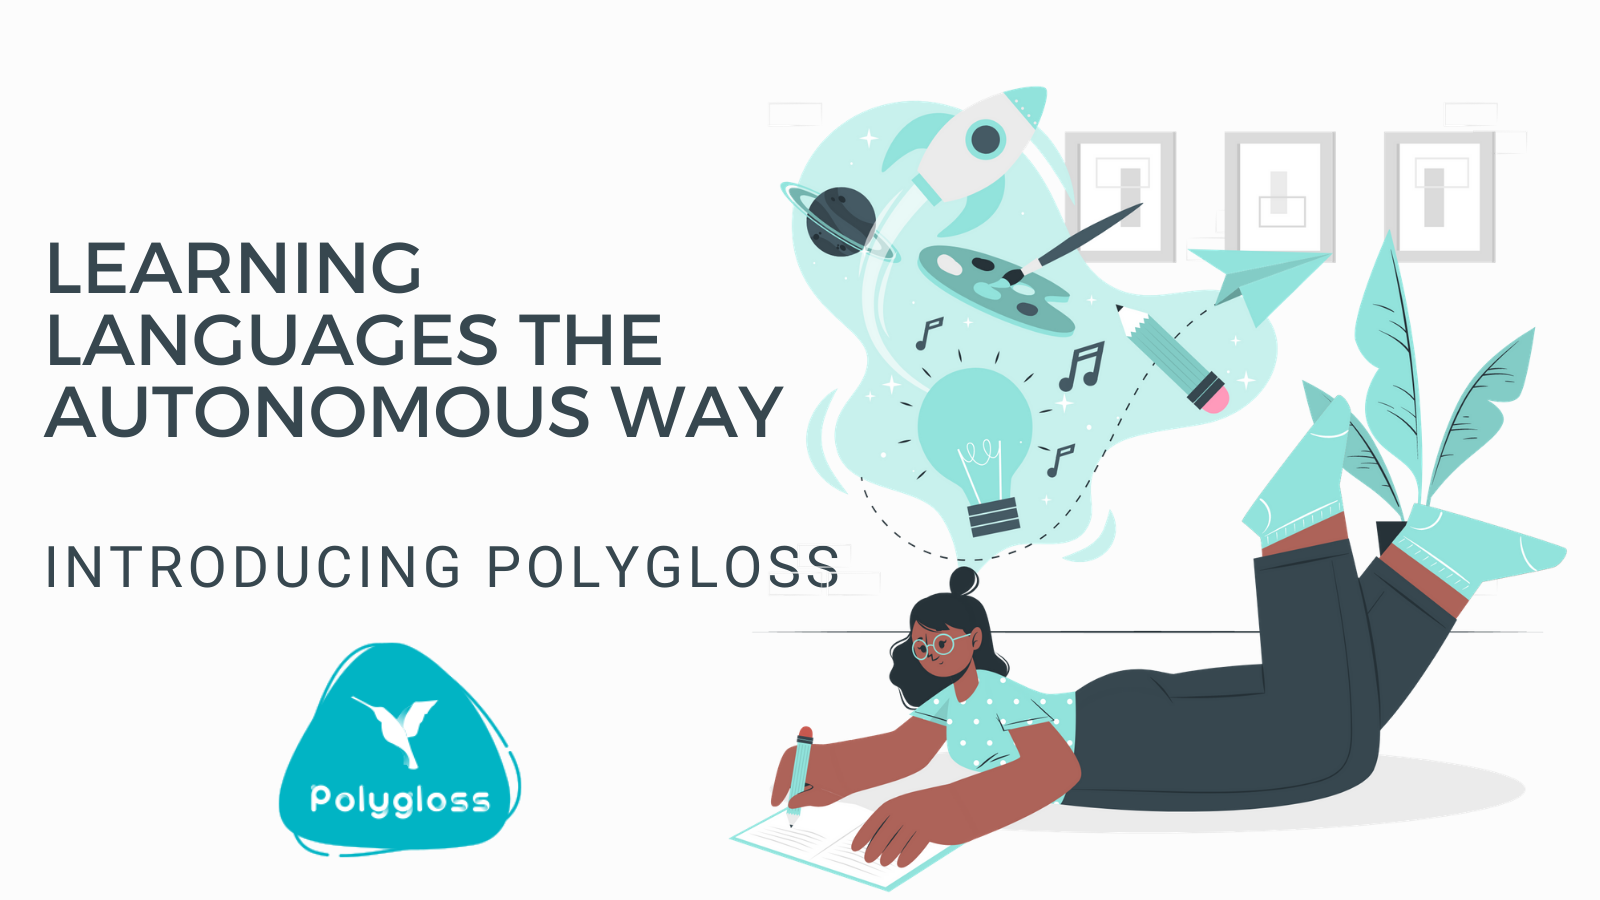 https://polygloss.app/posts/learning-languages-the-autonomous-way-introducing-polygloss/